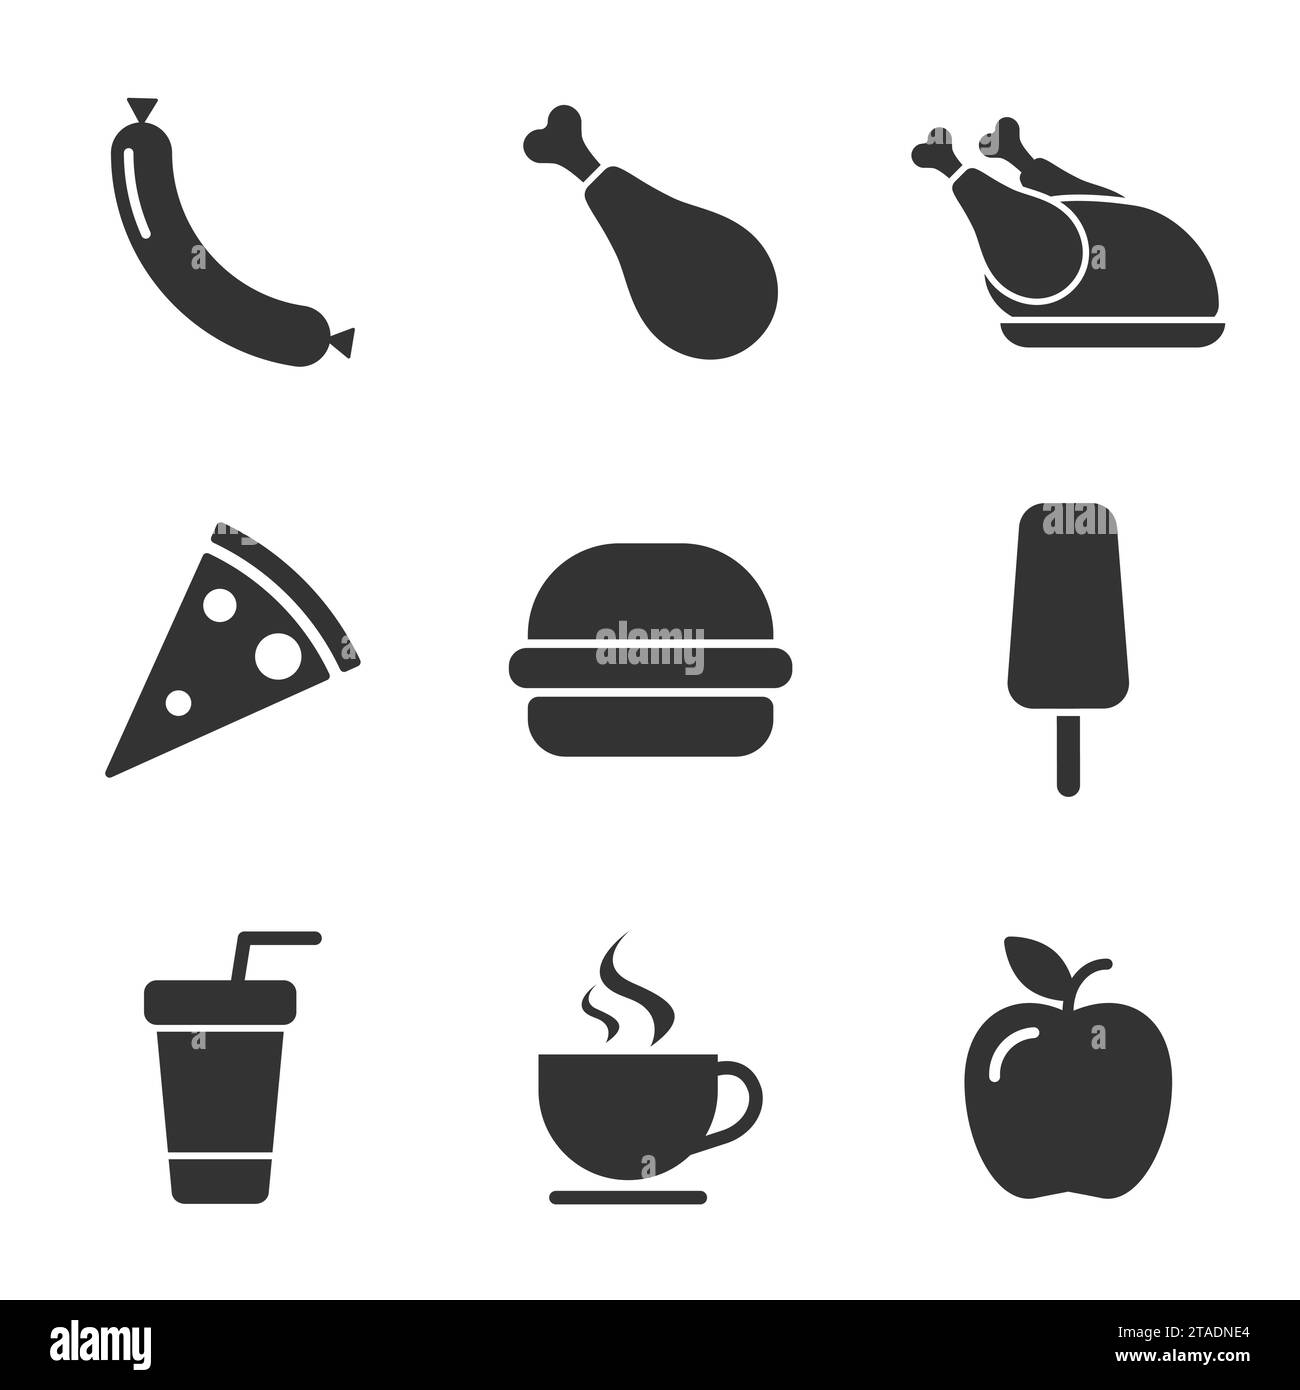 Meal кelated icon set. Food icon set. Flat vector illustration. Stock Vector